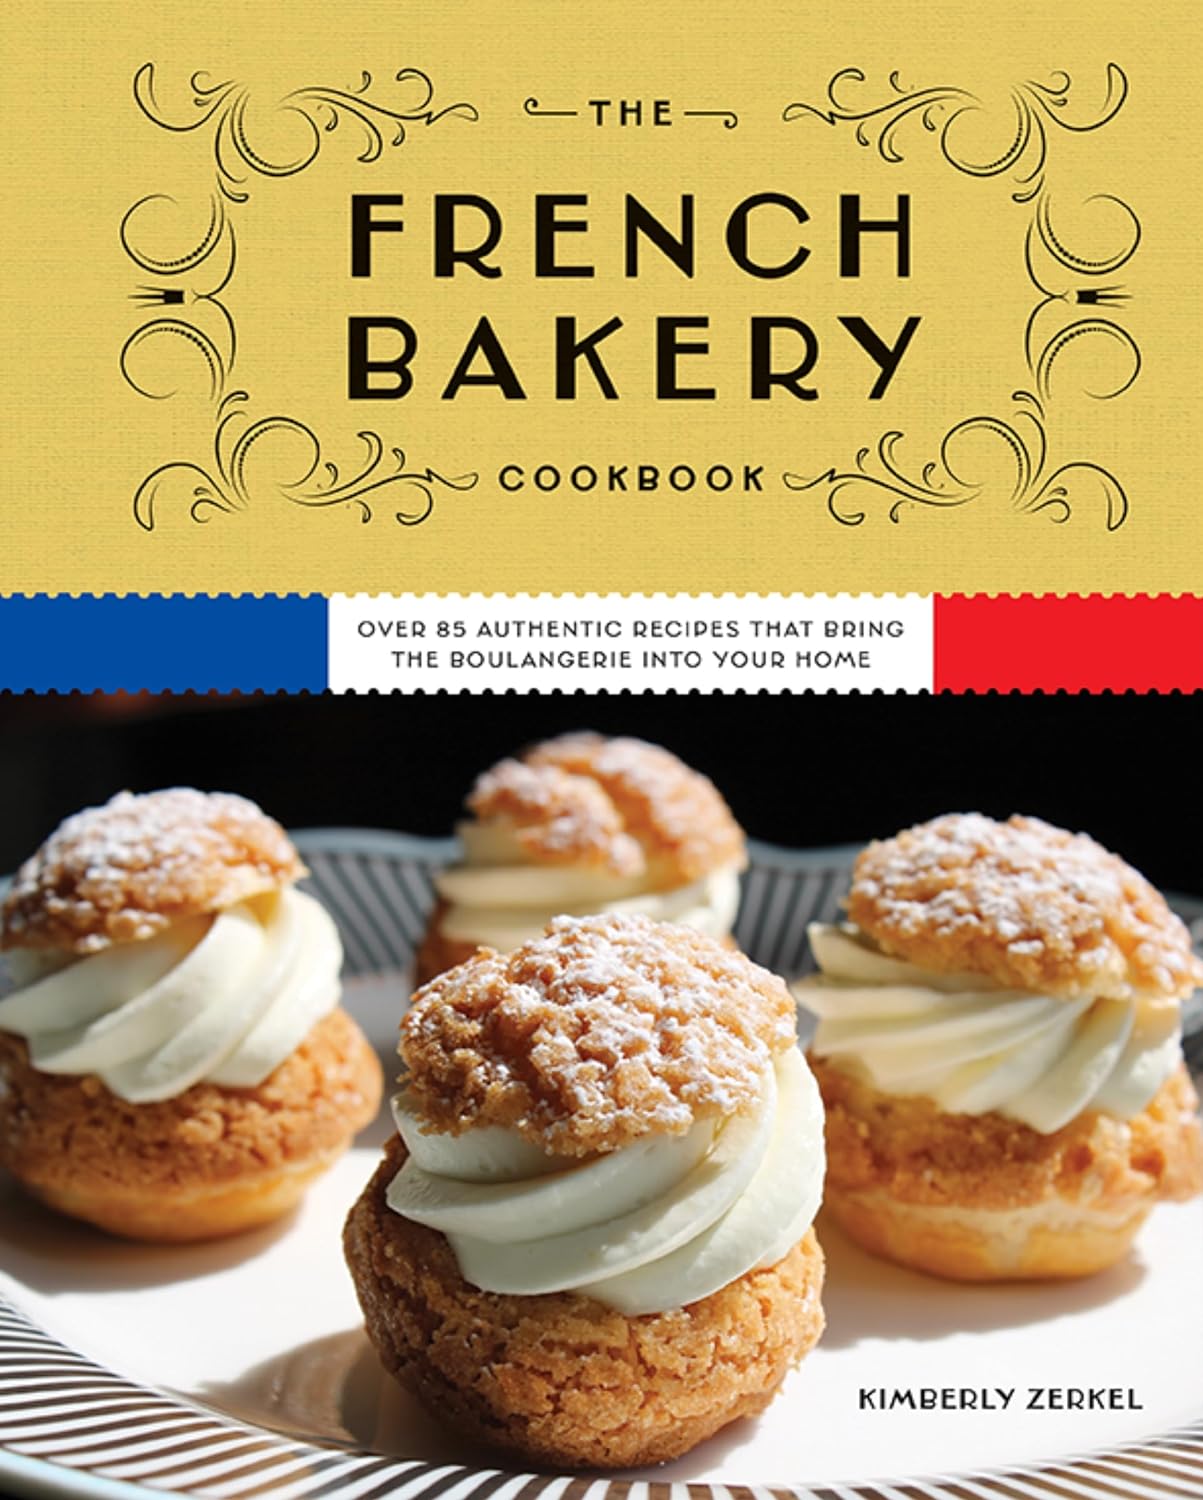 The French Bakery Cookbook: Over 85 Authentic Recipes That Bring the Boulangerie into Your Home (Kimberly Zerkel)